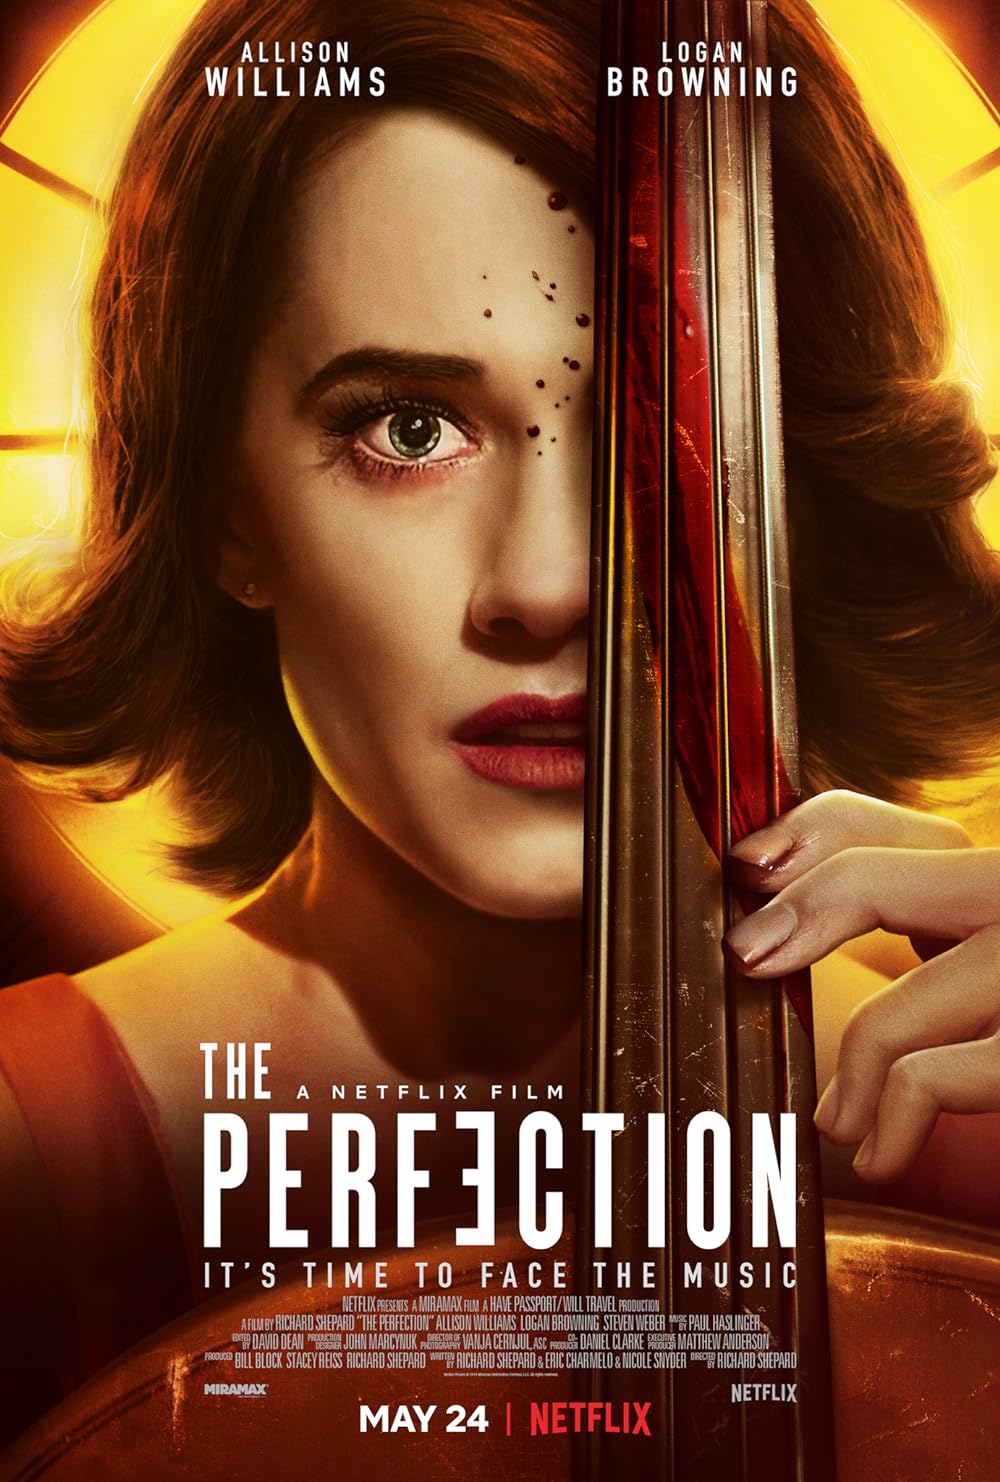 The Perfection (2018) 640Kbps 23.976Fps 48Khz 5.1Ch DD+ NF E-AC3 Turkish Audio TAC